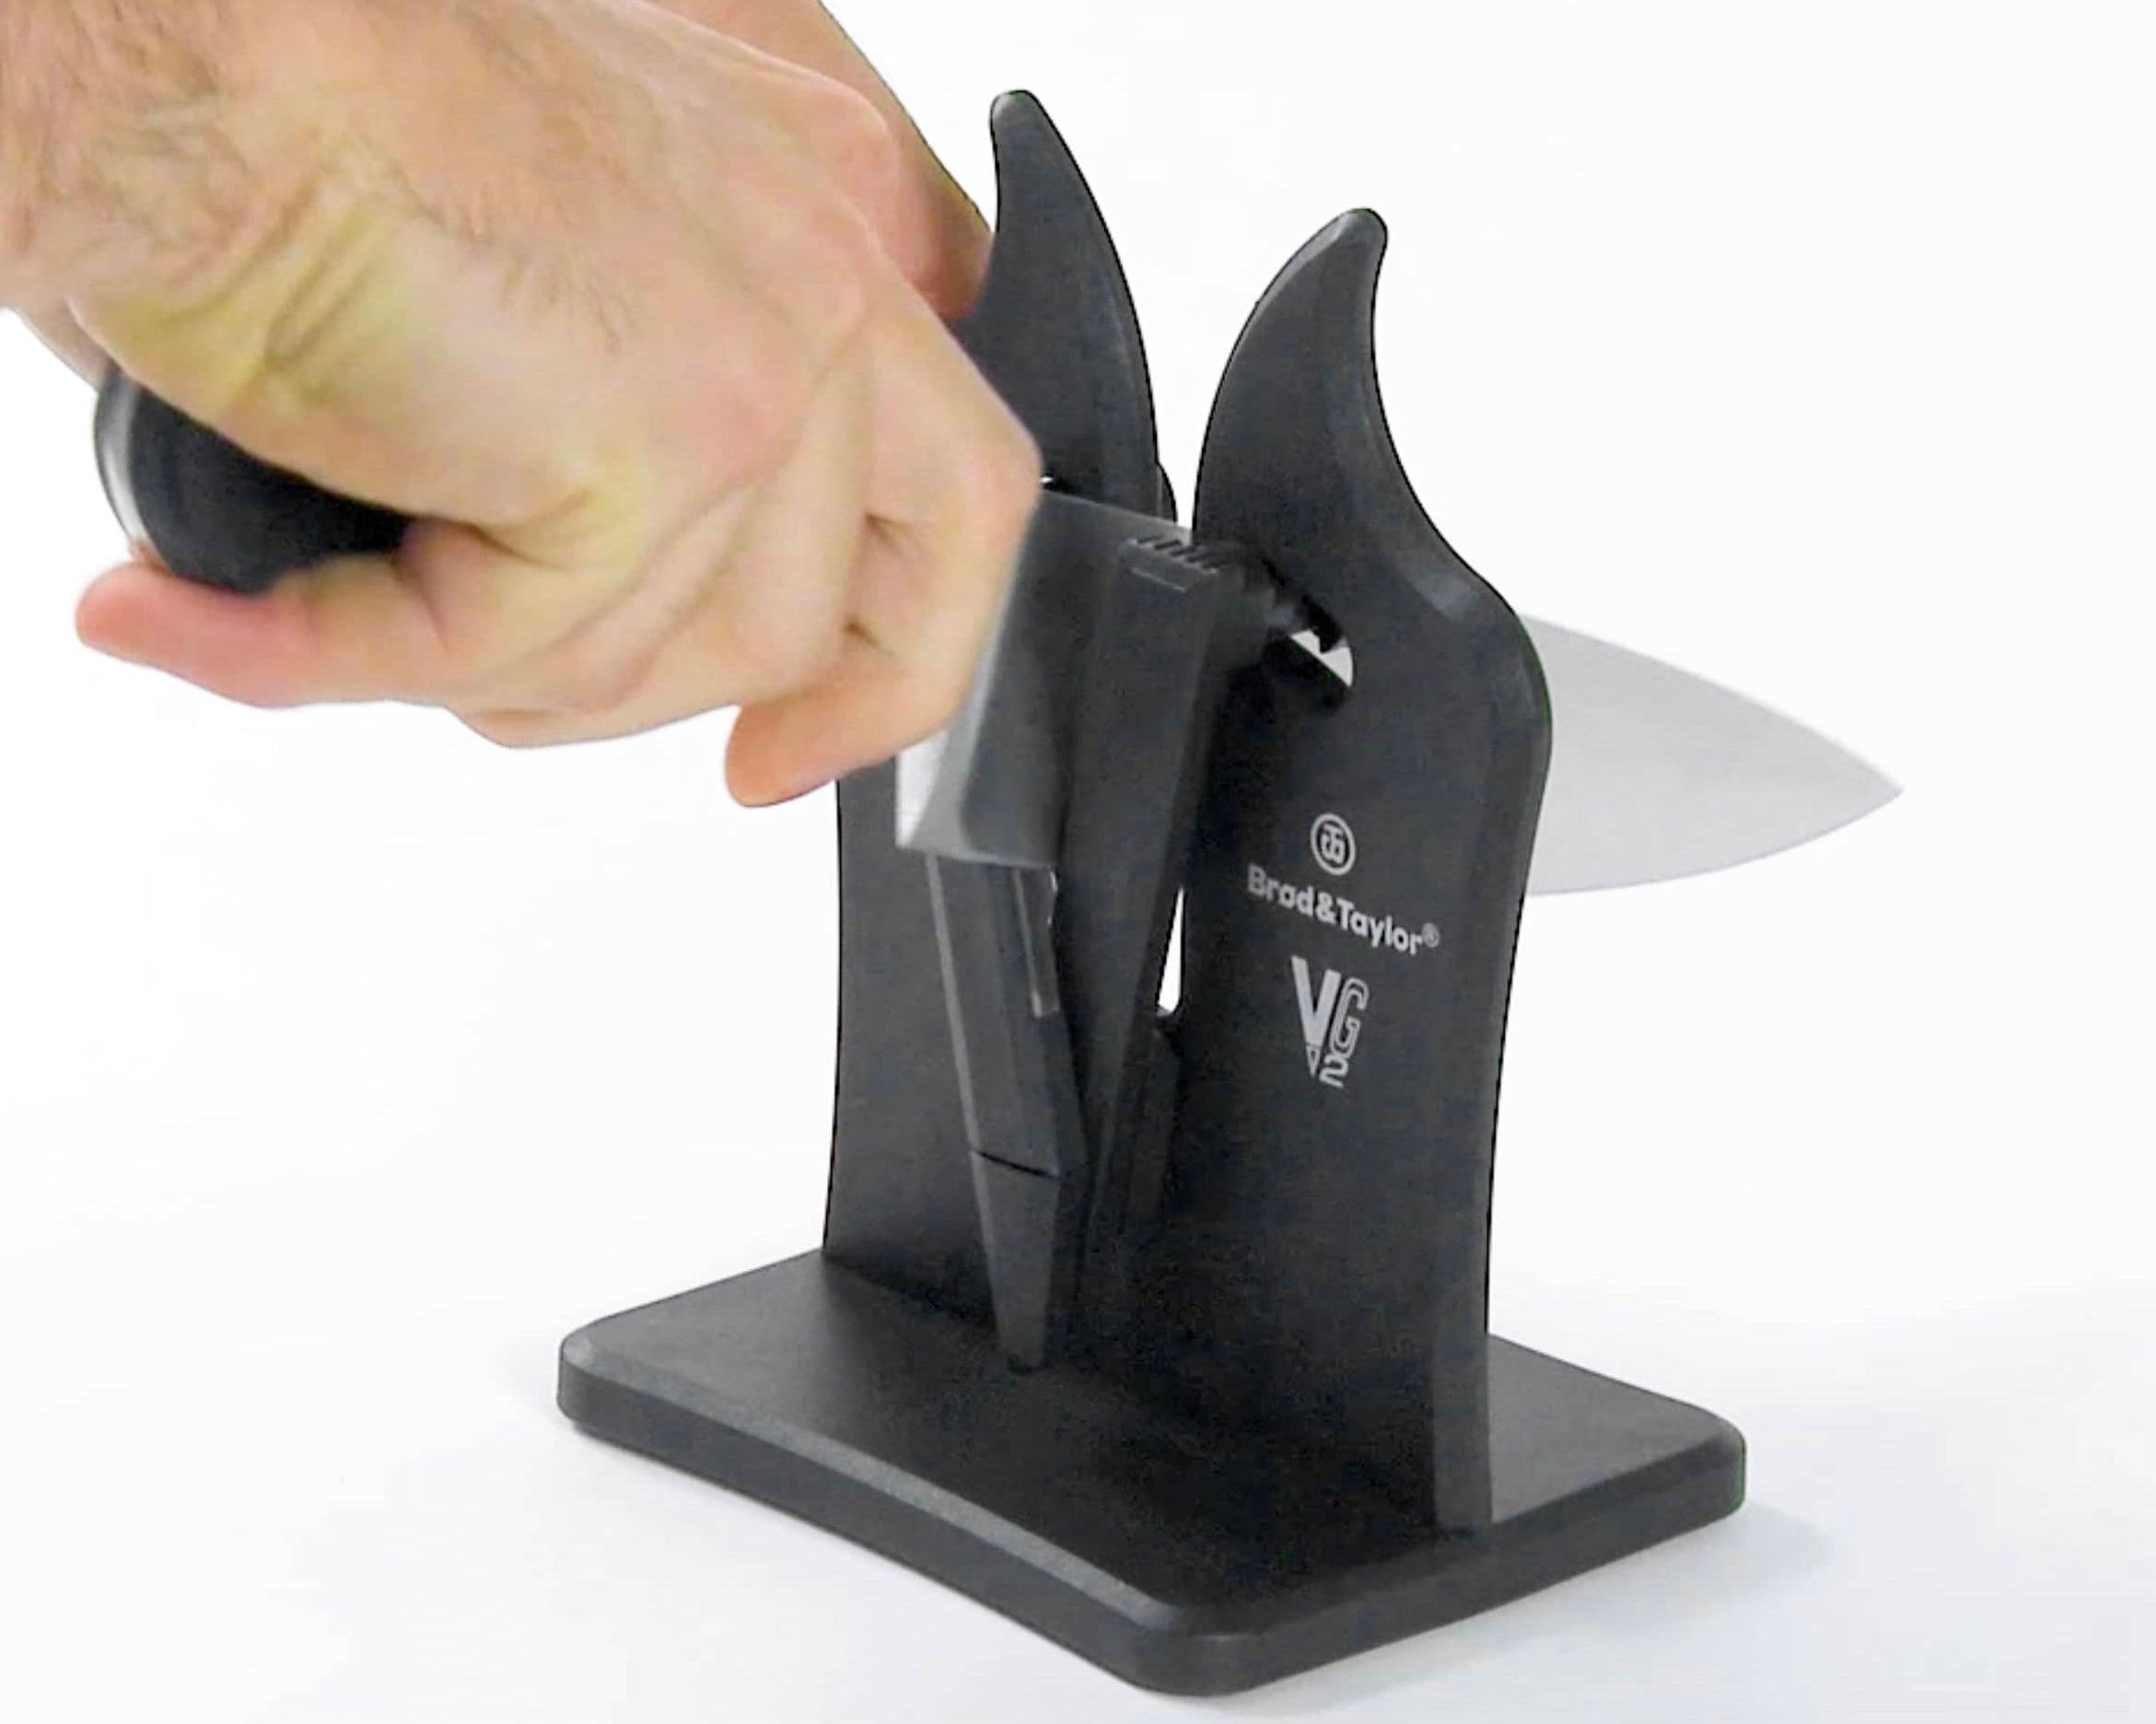 How To Polish A Knife So It's Scary Sharp! - Knife Sharpener Reviews